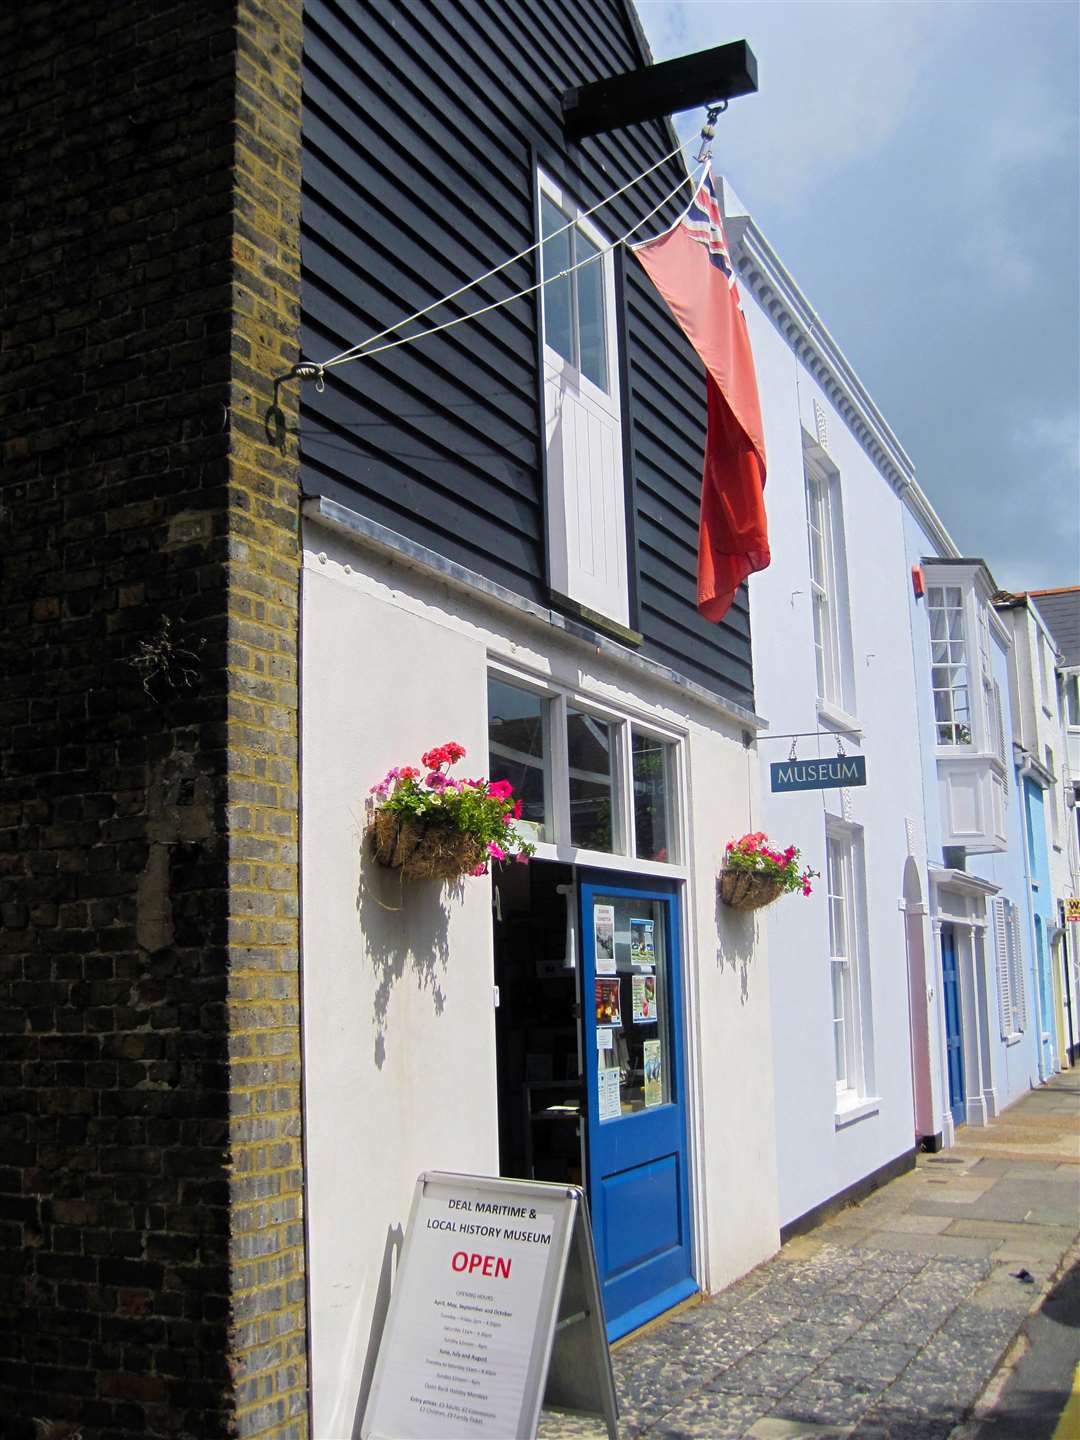 Deal Maritime and Local History Museum opens for the season on Good Friday